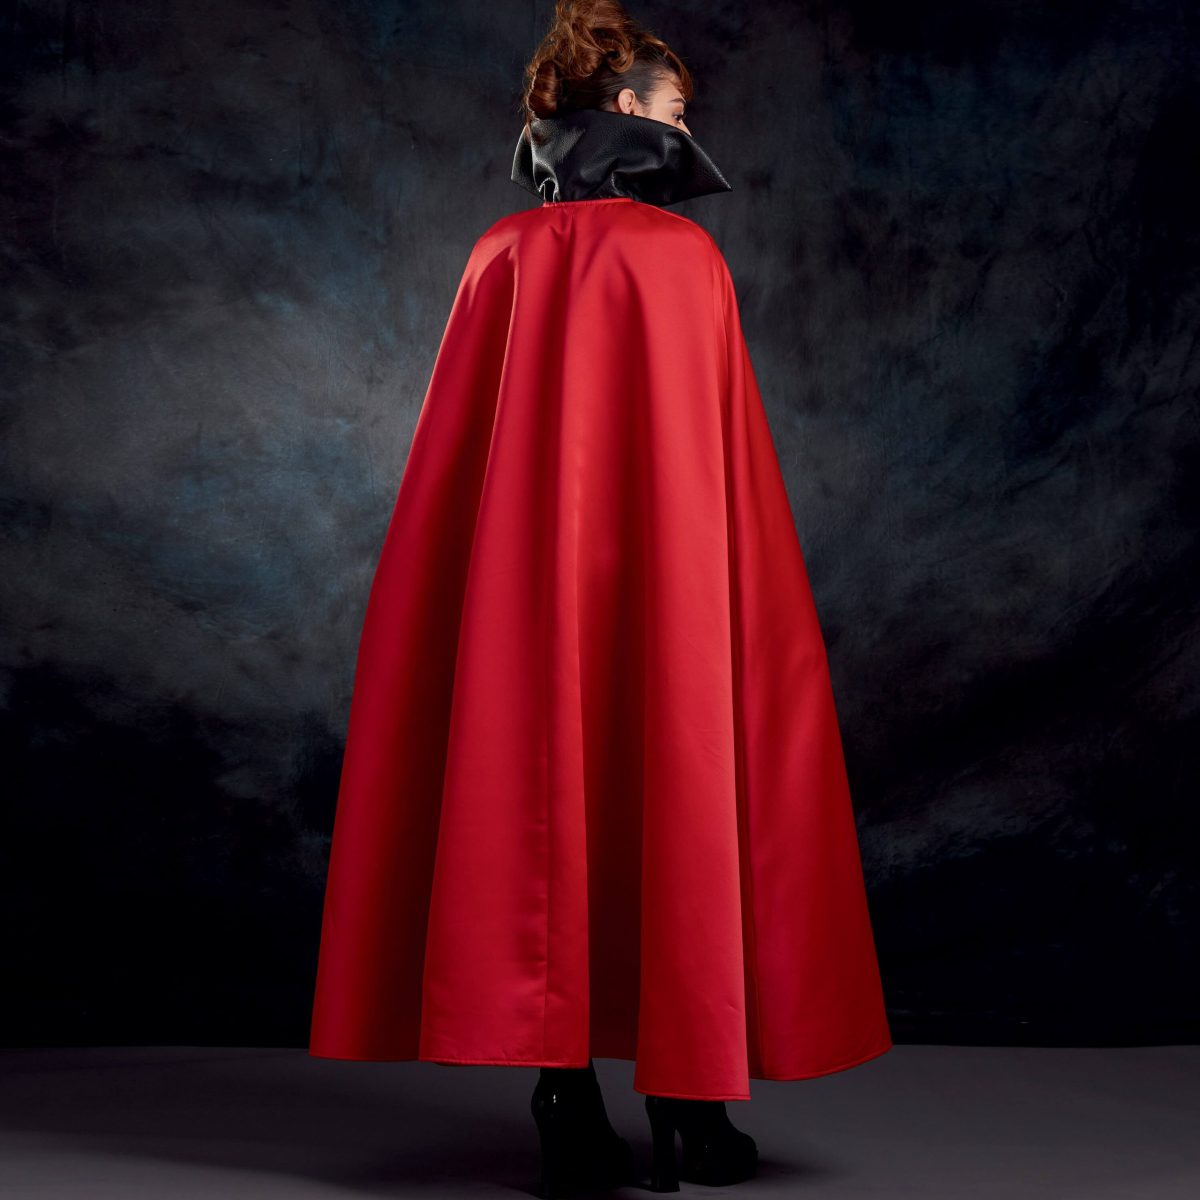 Simplicity Sewing Pattern S9008 Misses' Cape with Tie Costumes